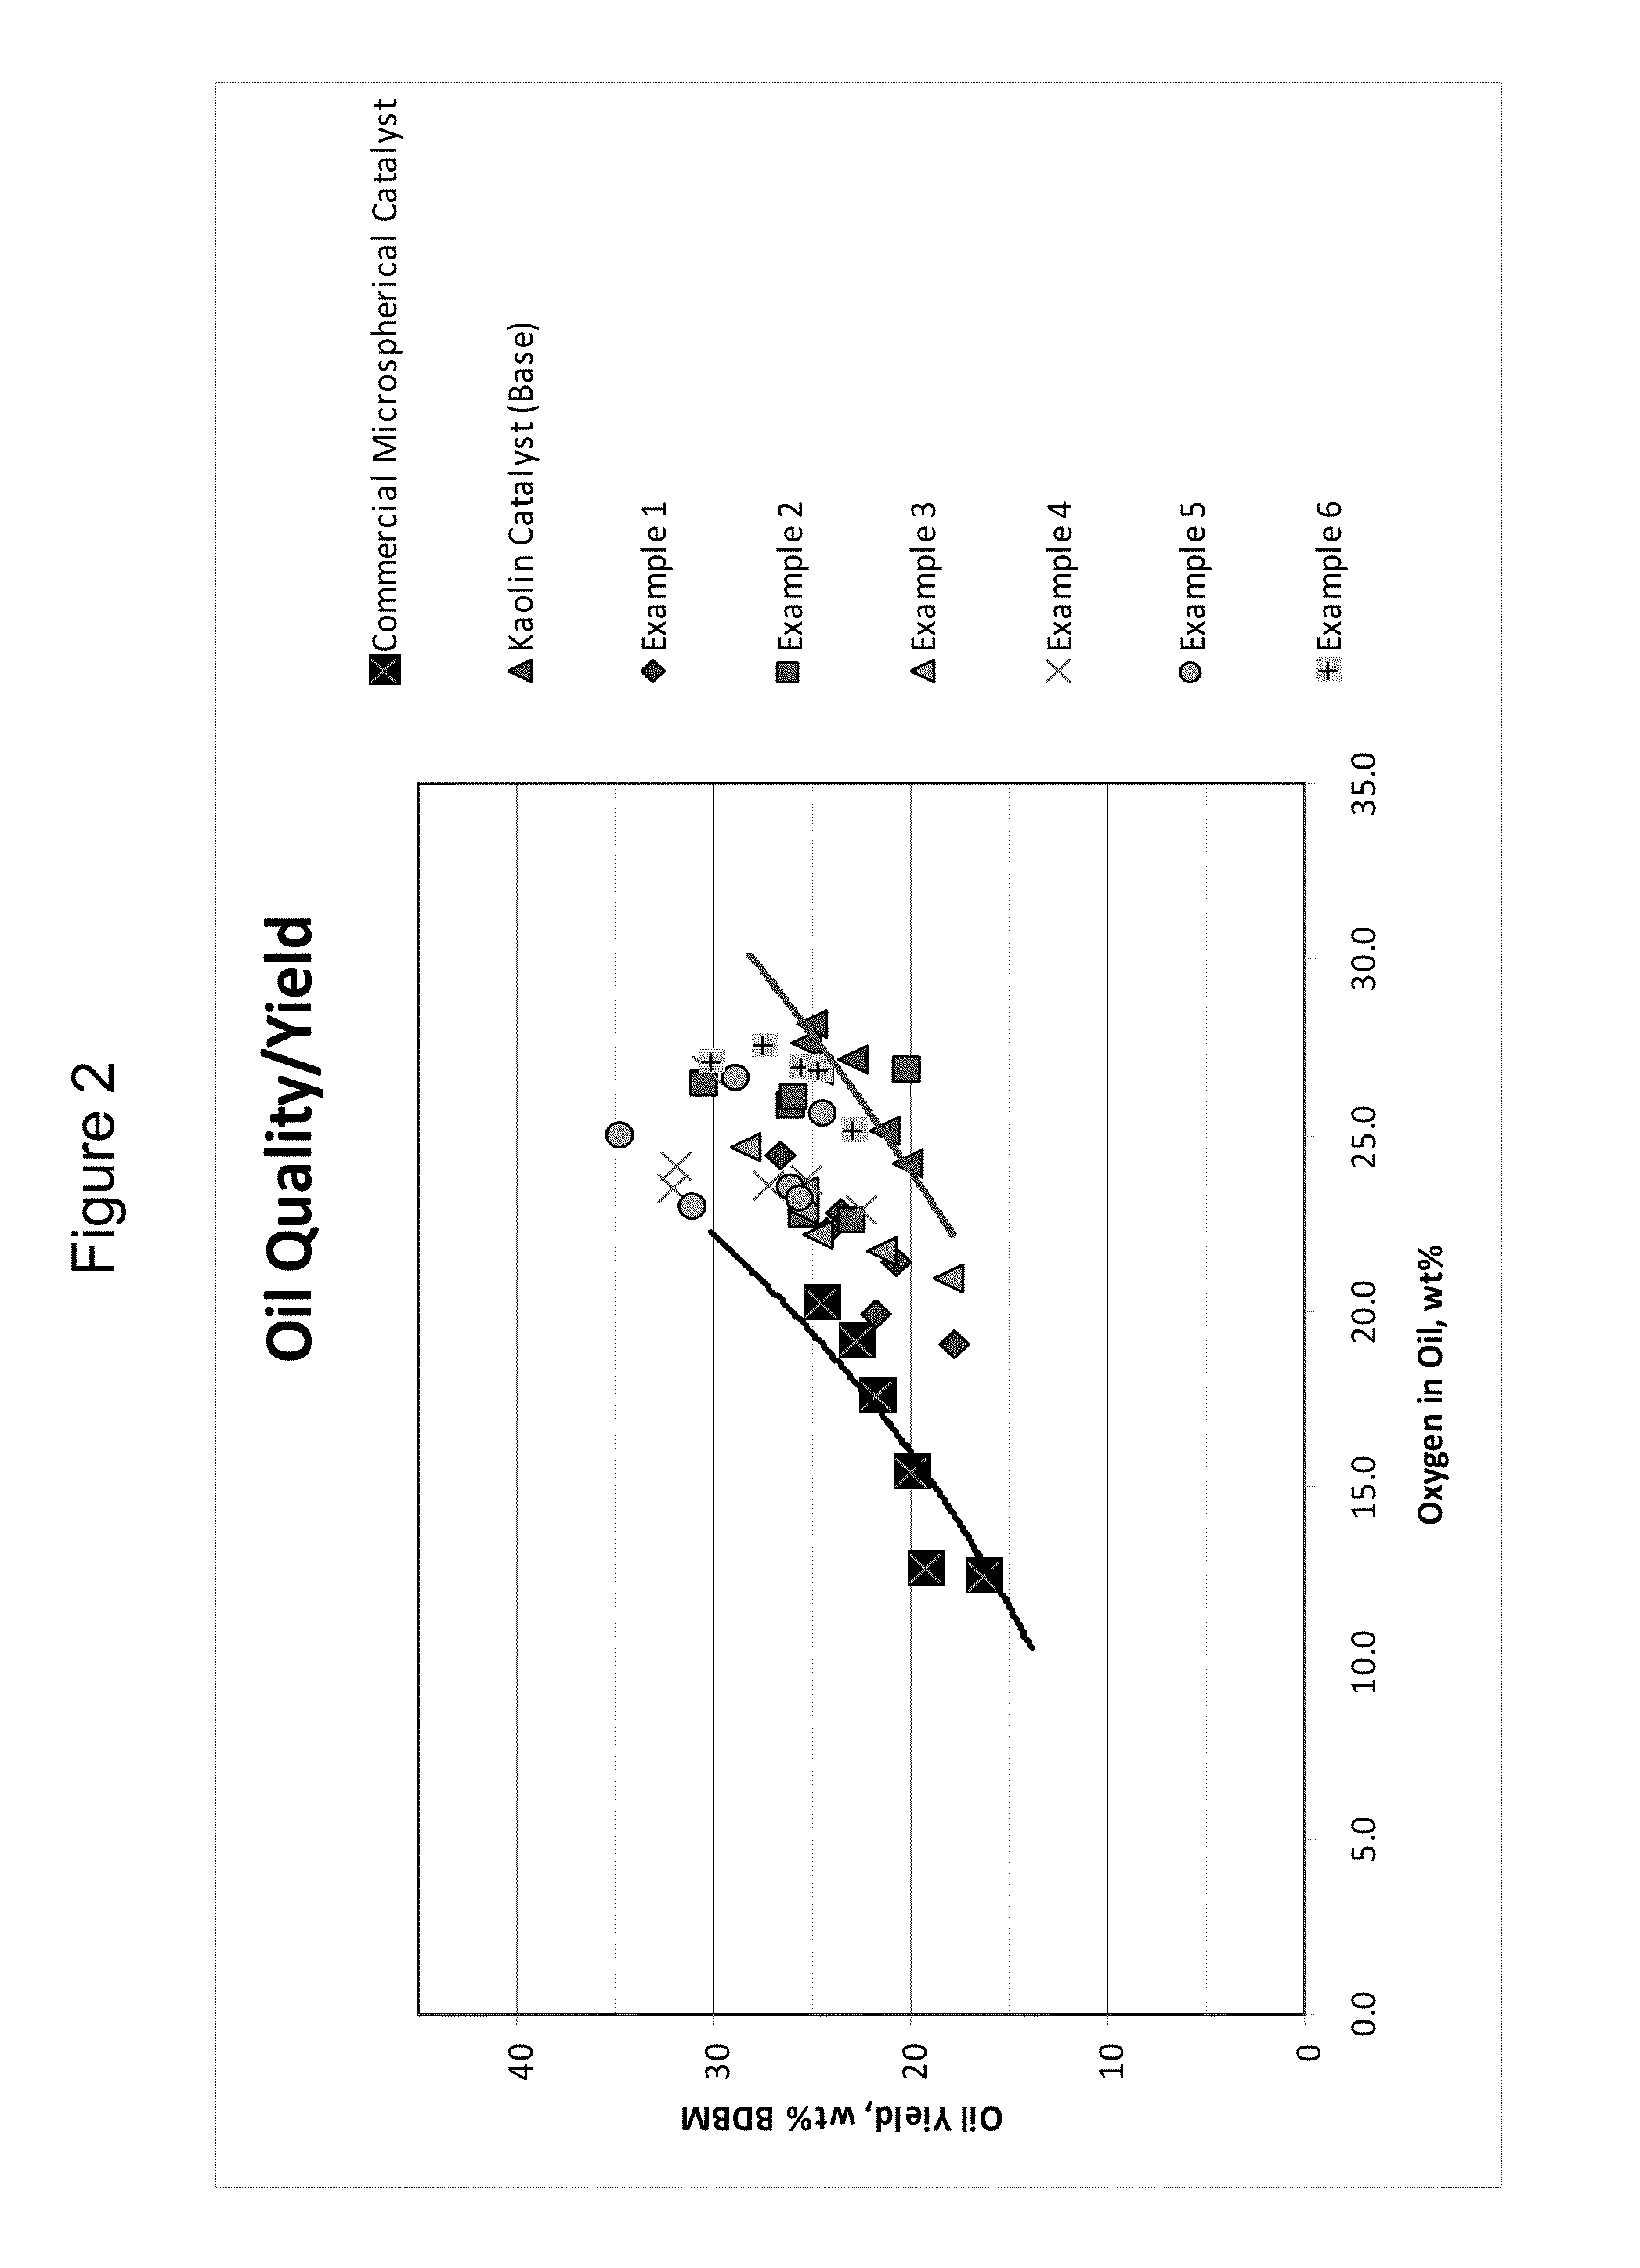 Phyllosilicate-Based Compositions and Methods of Making the Same for Catalytic Pyrolysis of Biomass